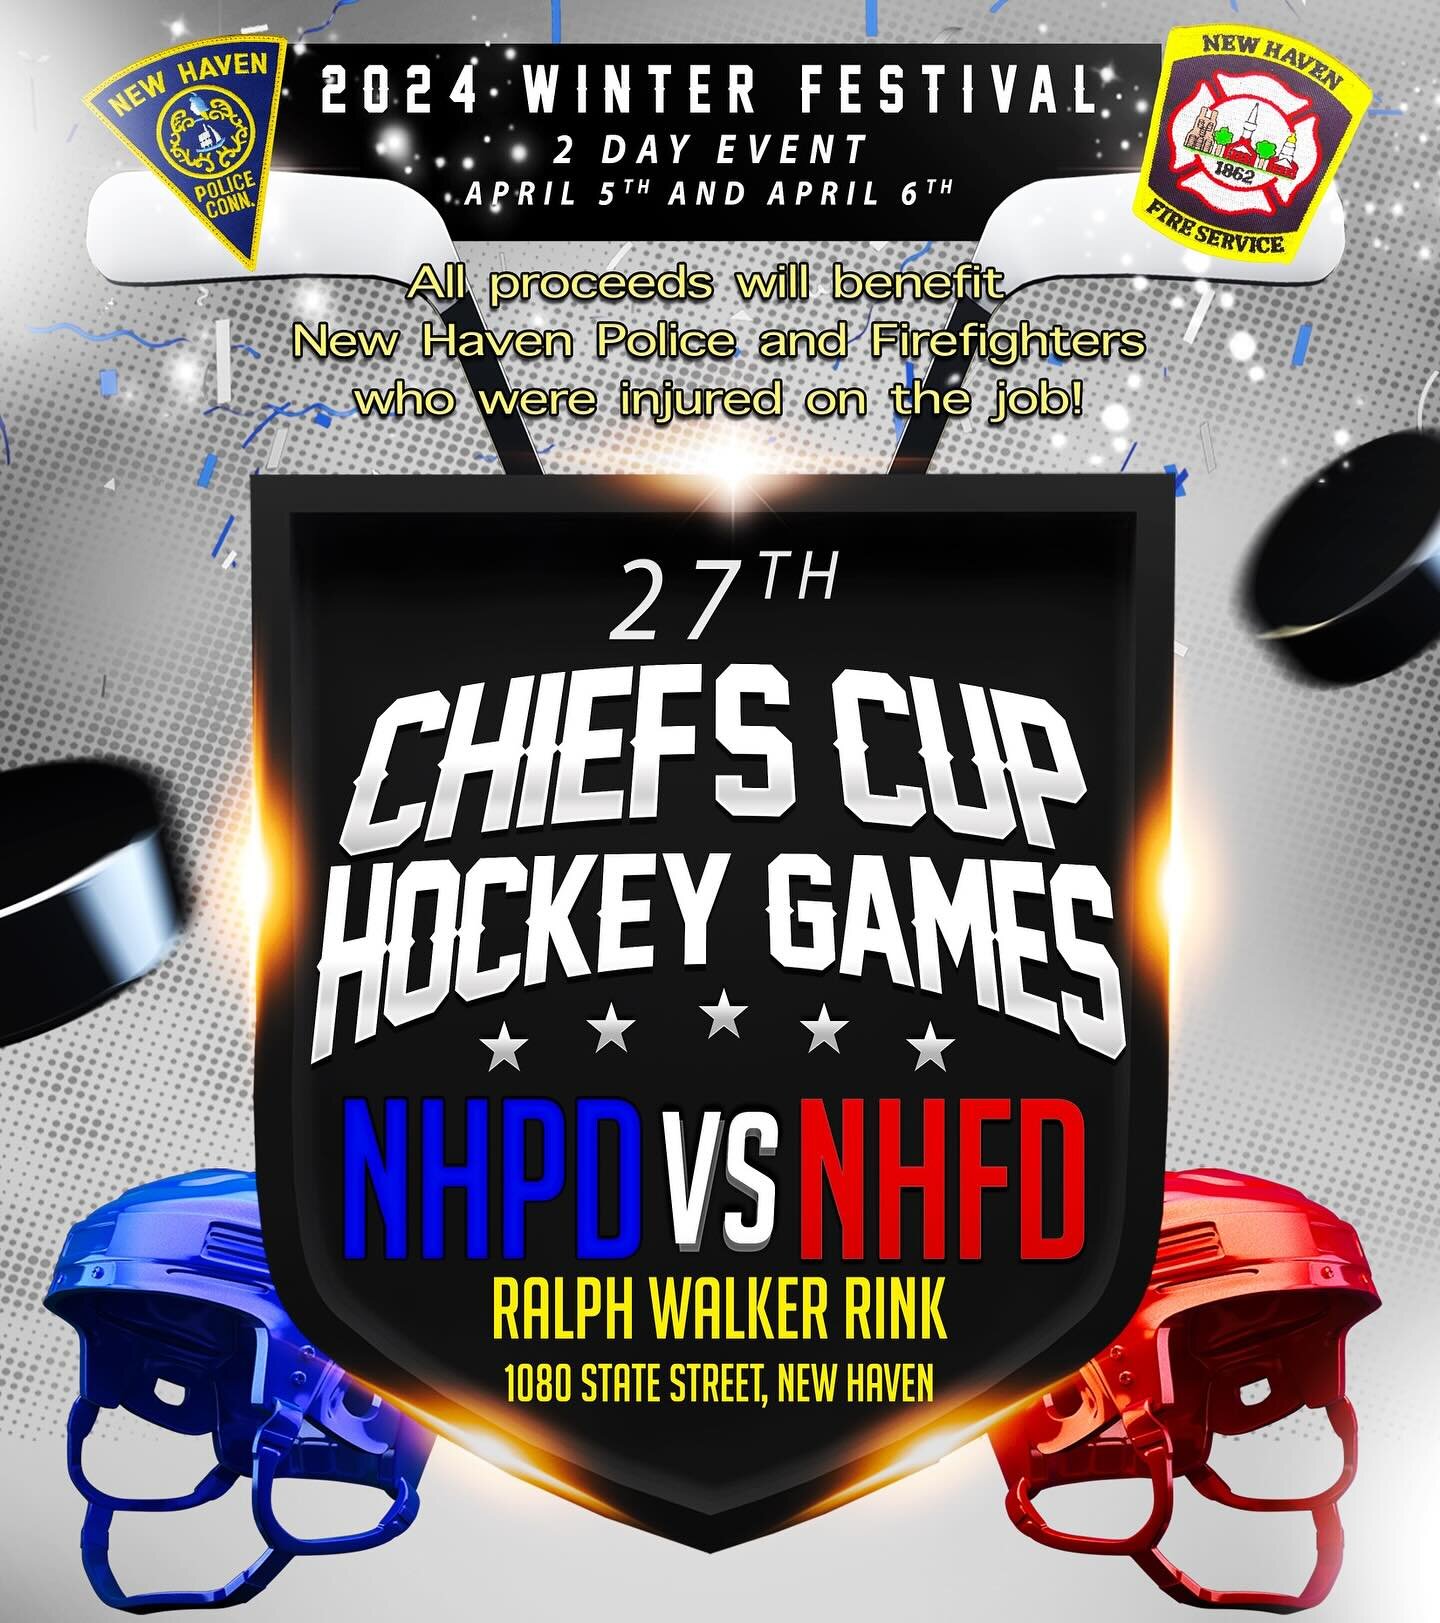 27th Annual Chiefs Cup is this Friday and Saturday at Ralph Walker Rink in New Haven. Festivities kick off with the Retiree Game and Elm City Cup on Friday night 4/5 and the Chiefs Cup Game Saturday 4/6 at 12pm. Tickets are good for all 3 games and a